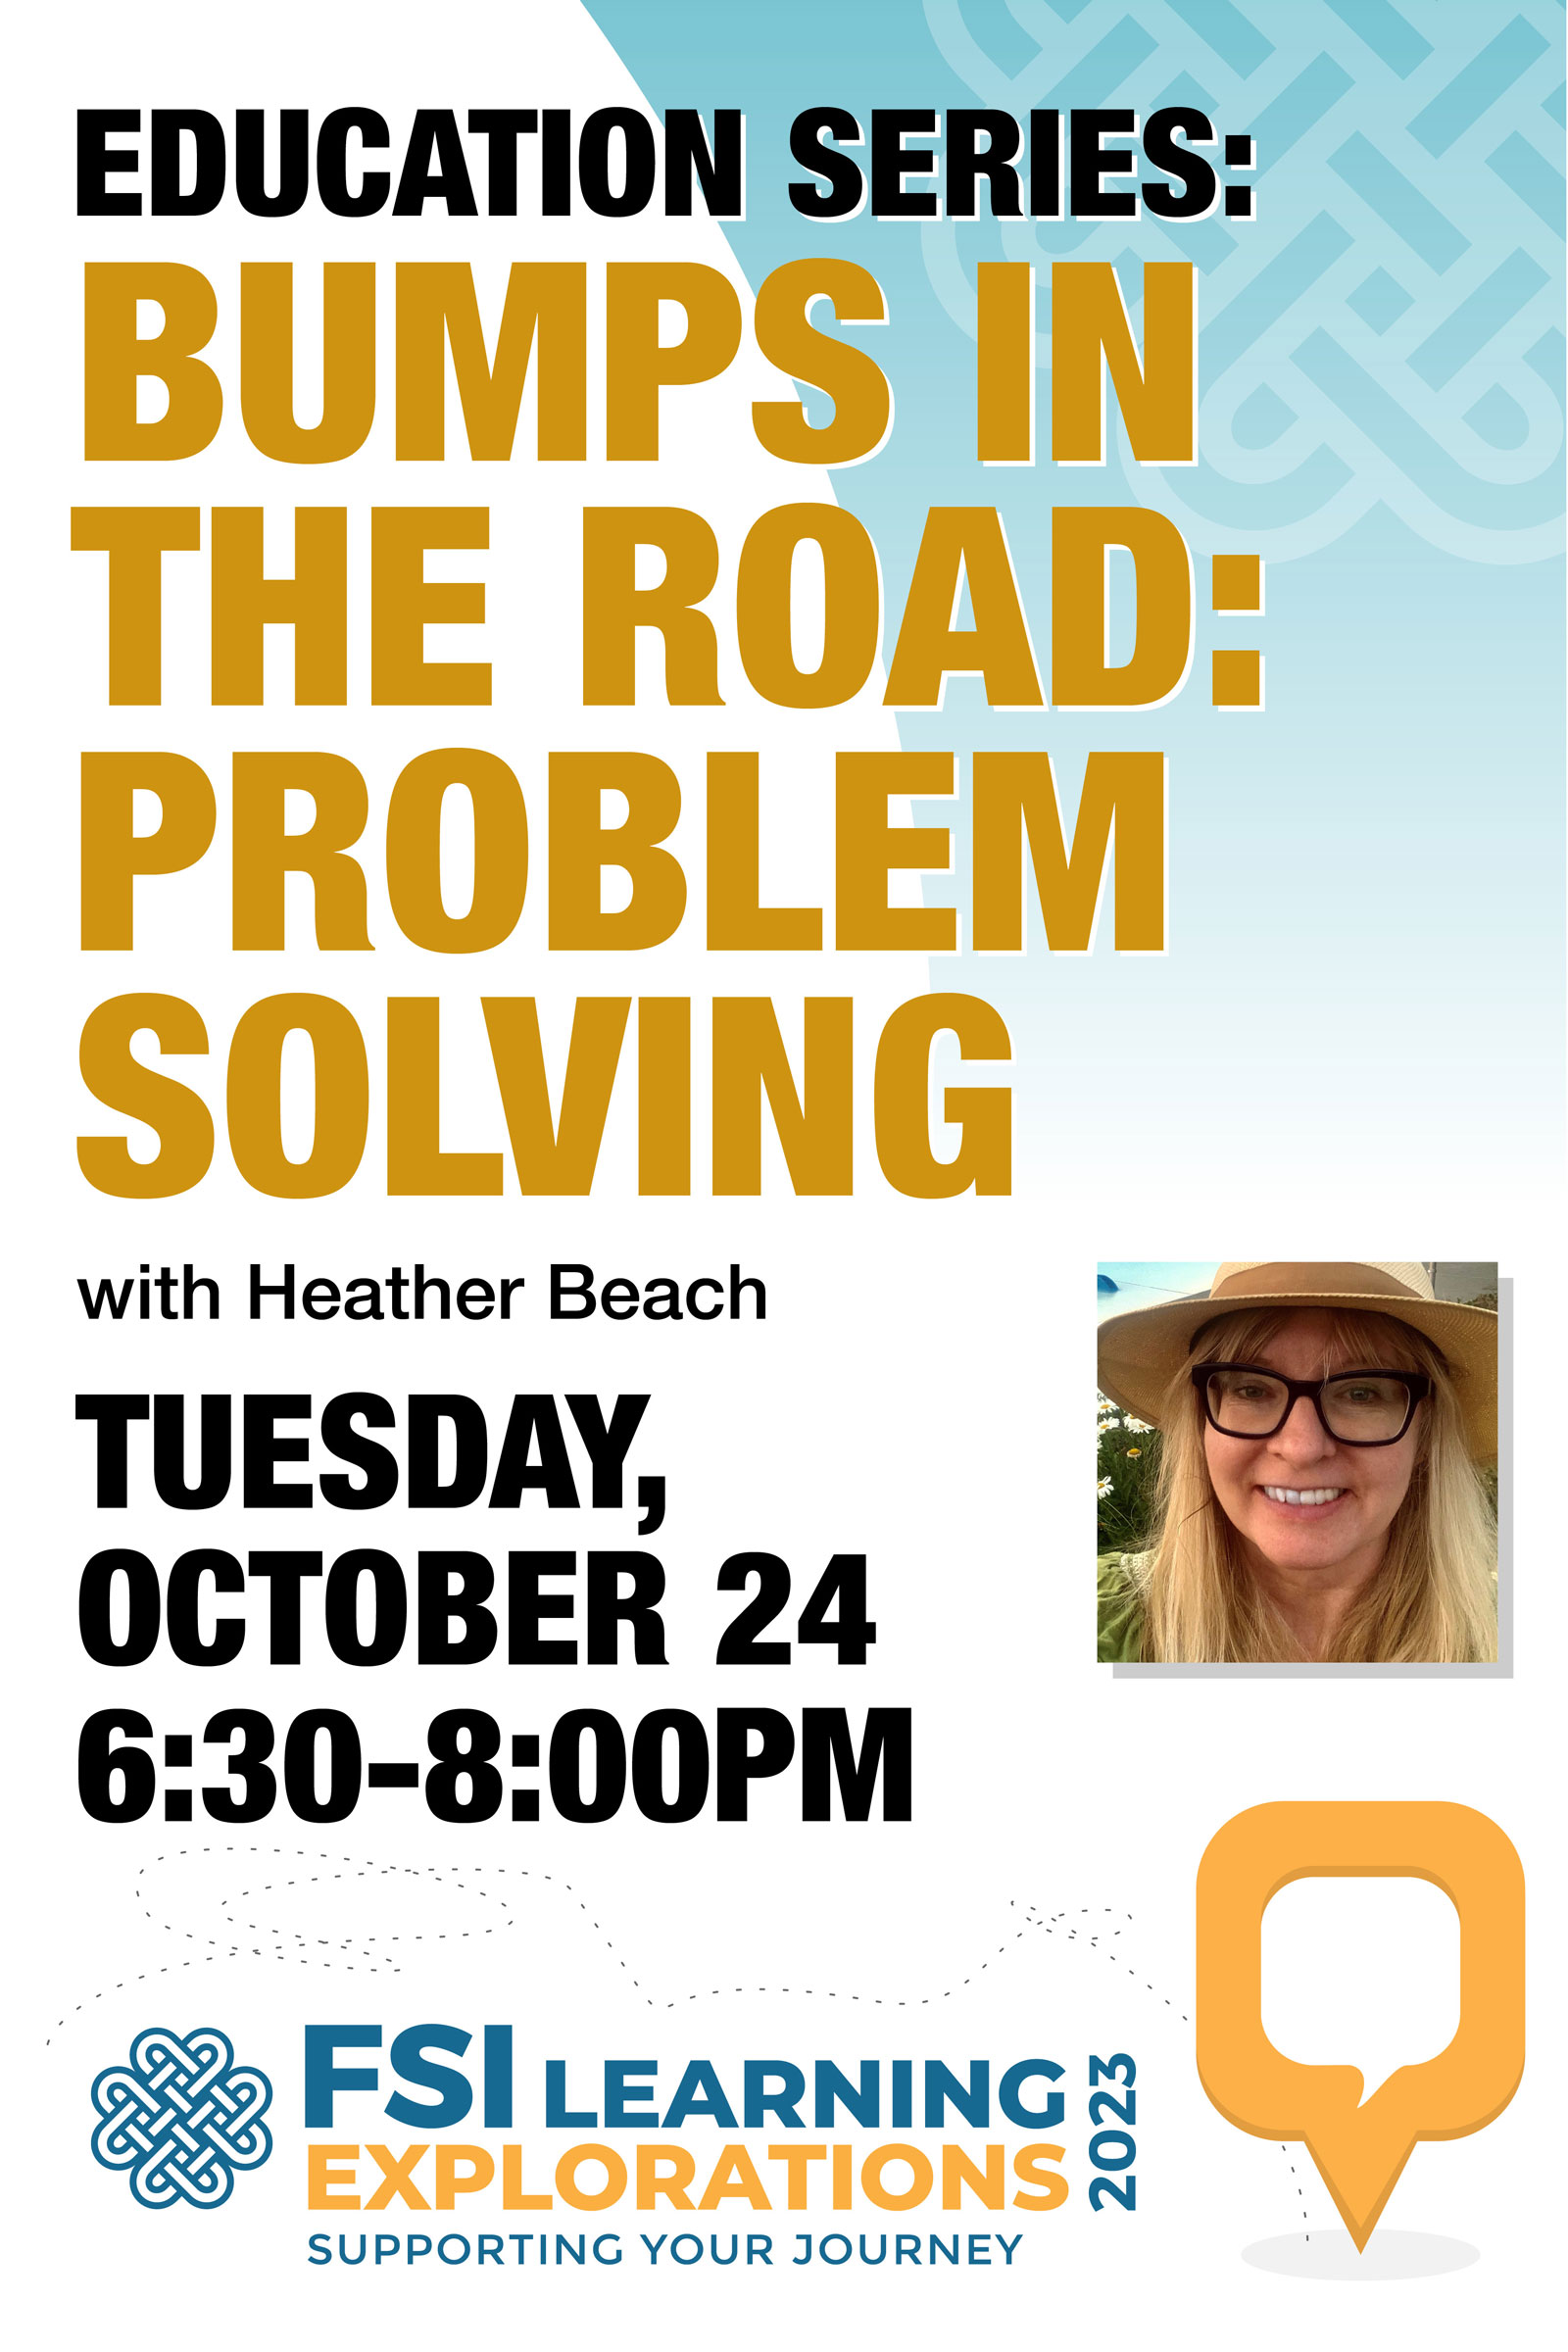 FSI Learning Explorations ~ Education Series: Bumps in the Road: Problem Solving